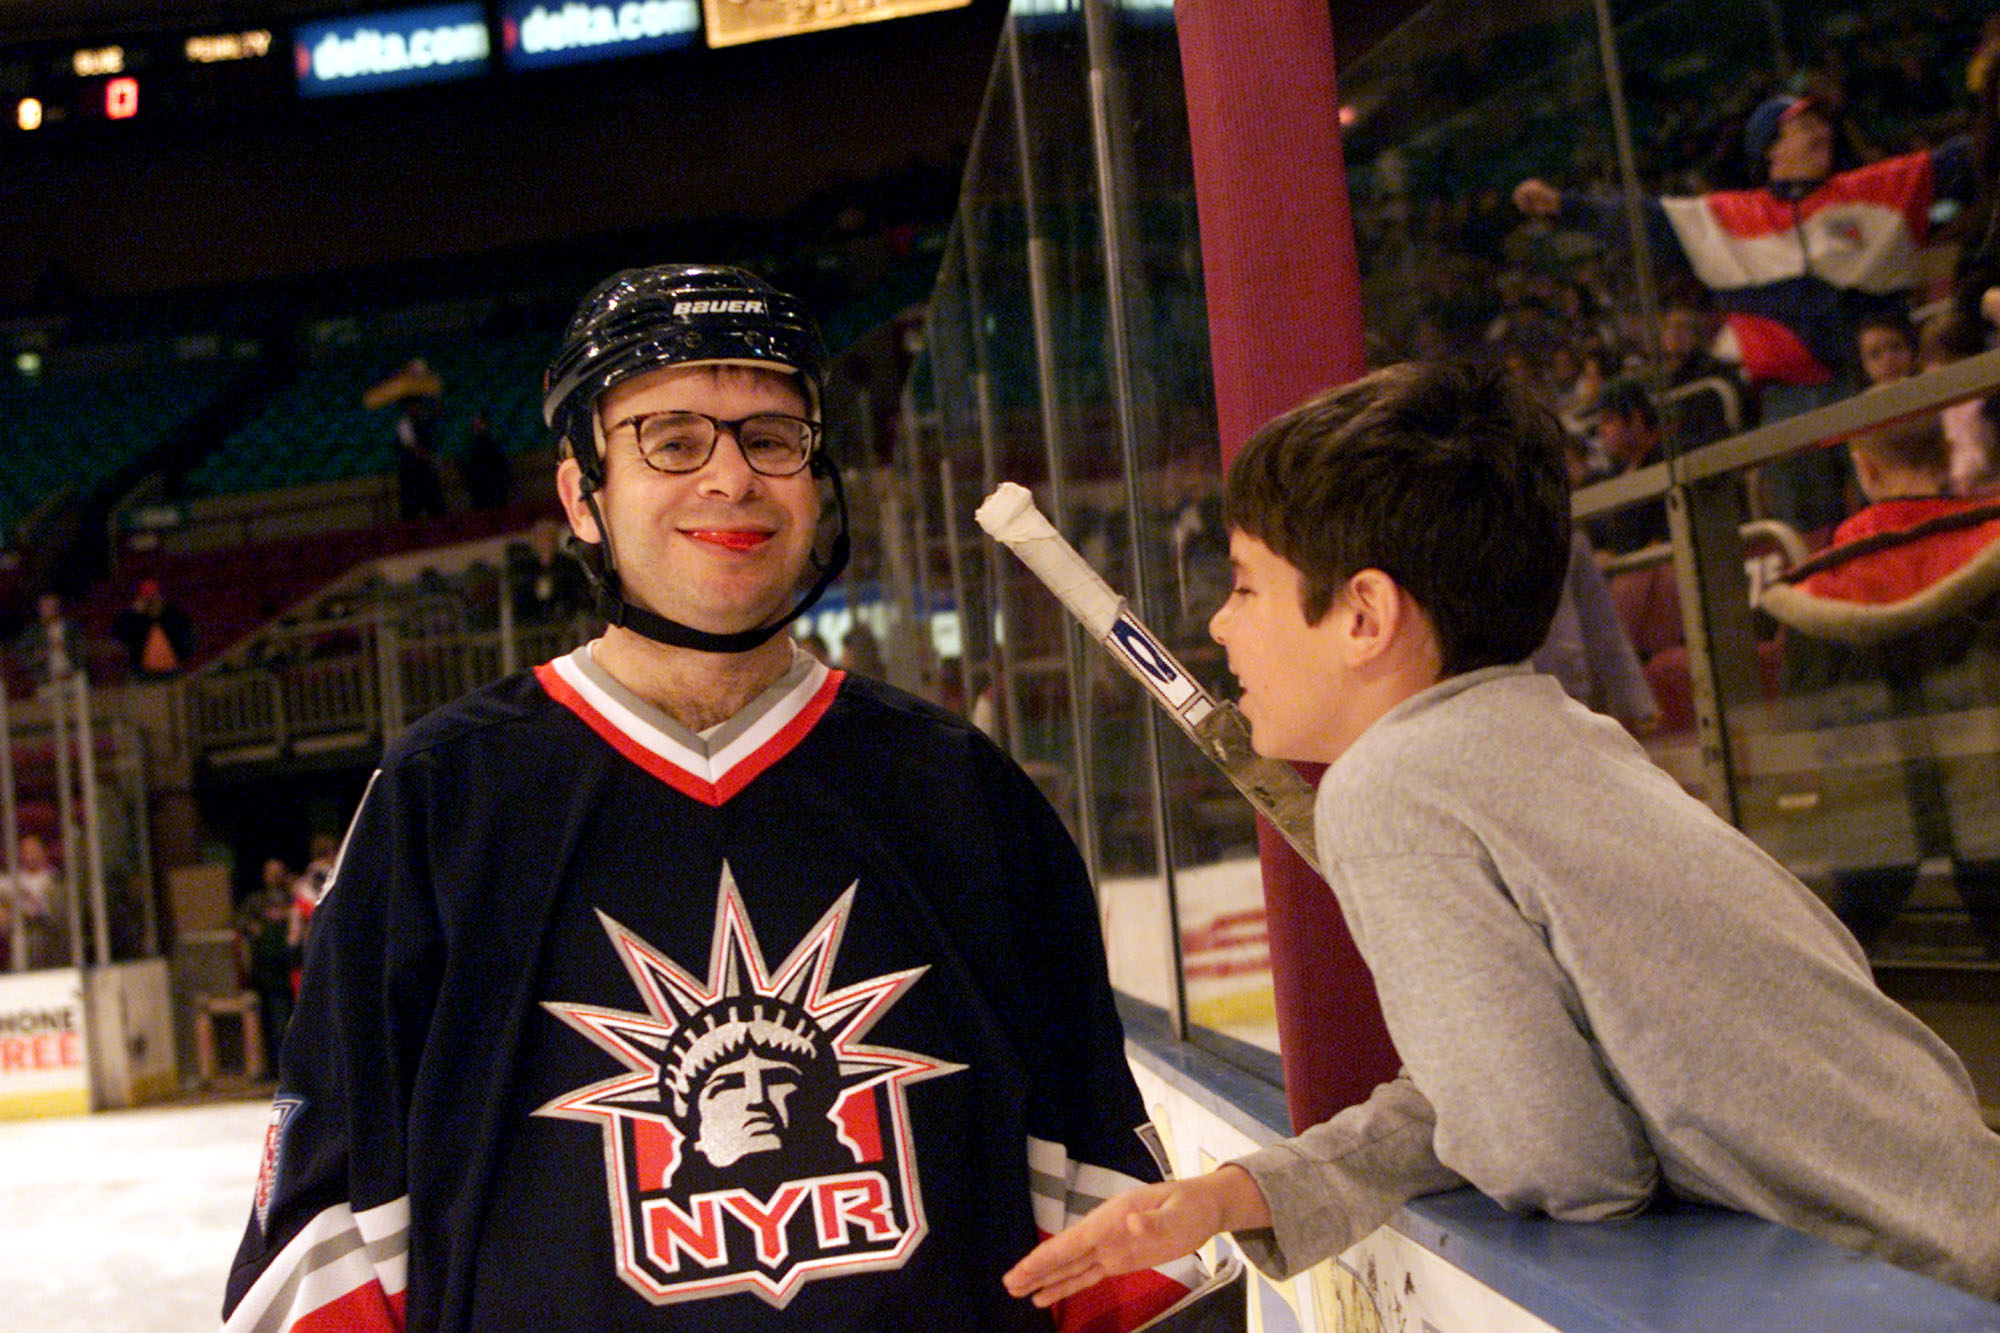 Rick Moranis and Mitchell Moranis at the Superskate 2001 charity hockey event at Madison Square Garden on January 7 2001 in New York City. | Source: Getty Images